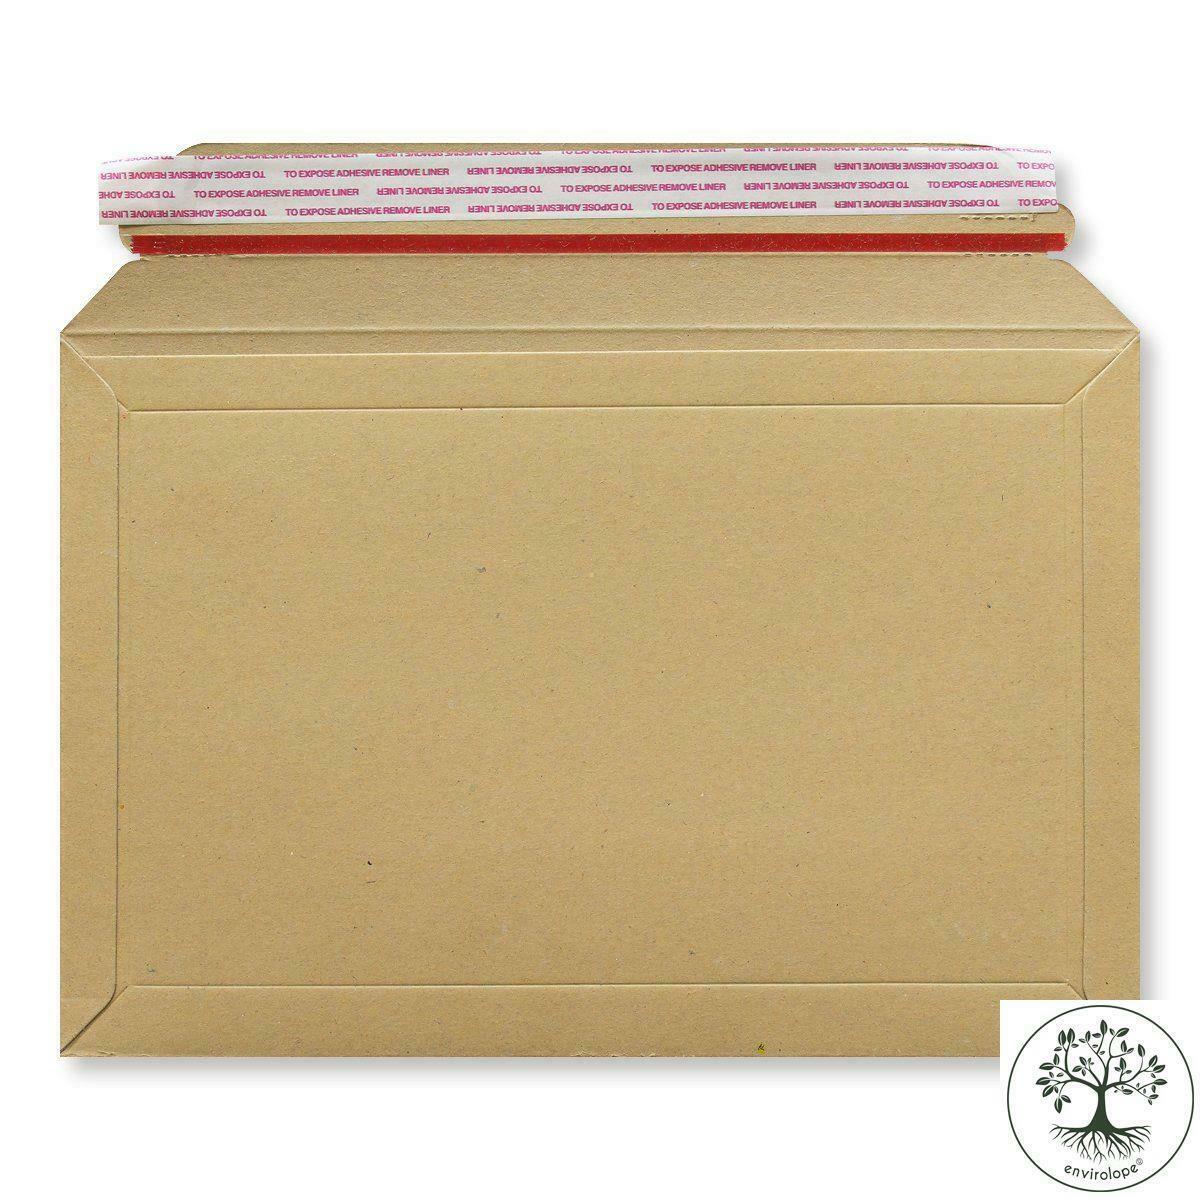 Capacity Book Mailers | Packaging Products Online